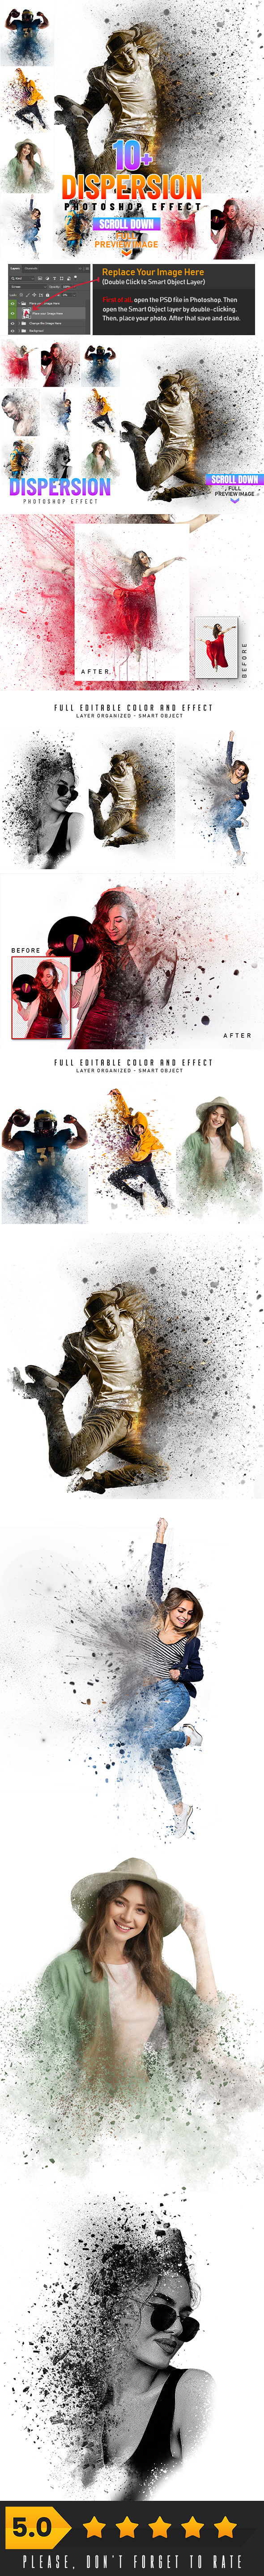 Dispersion Photo Effect Template